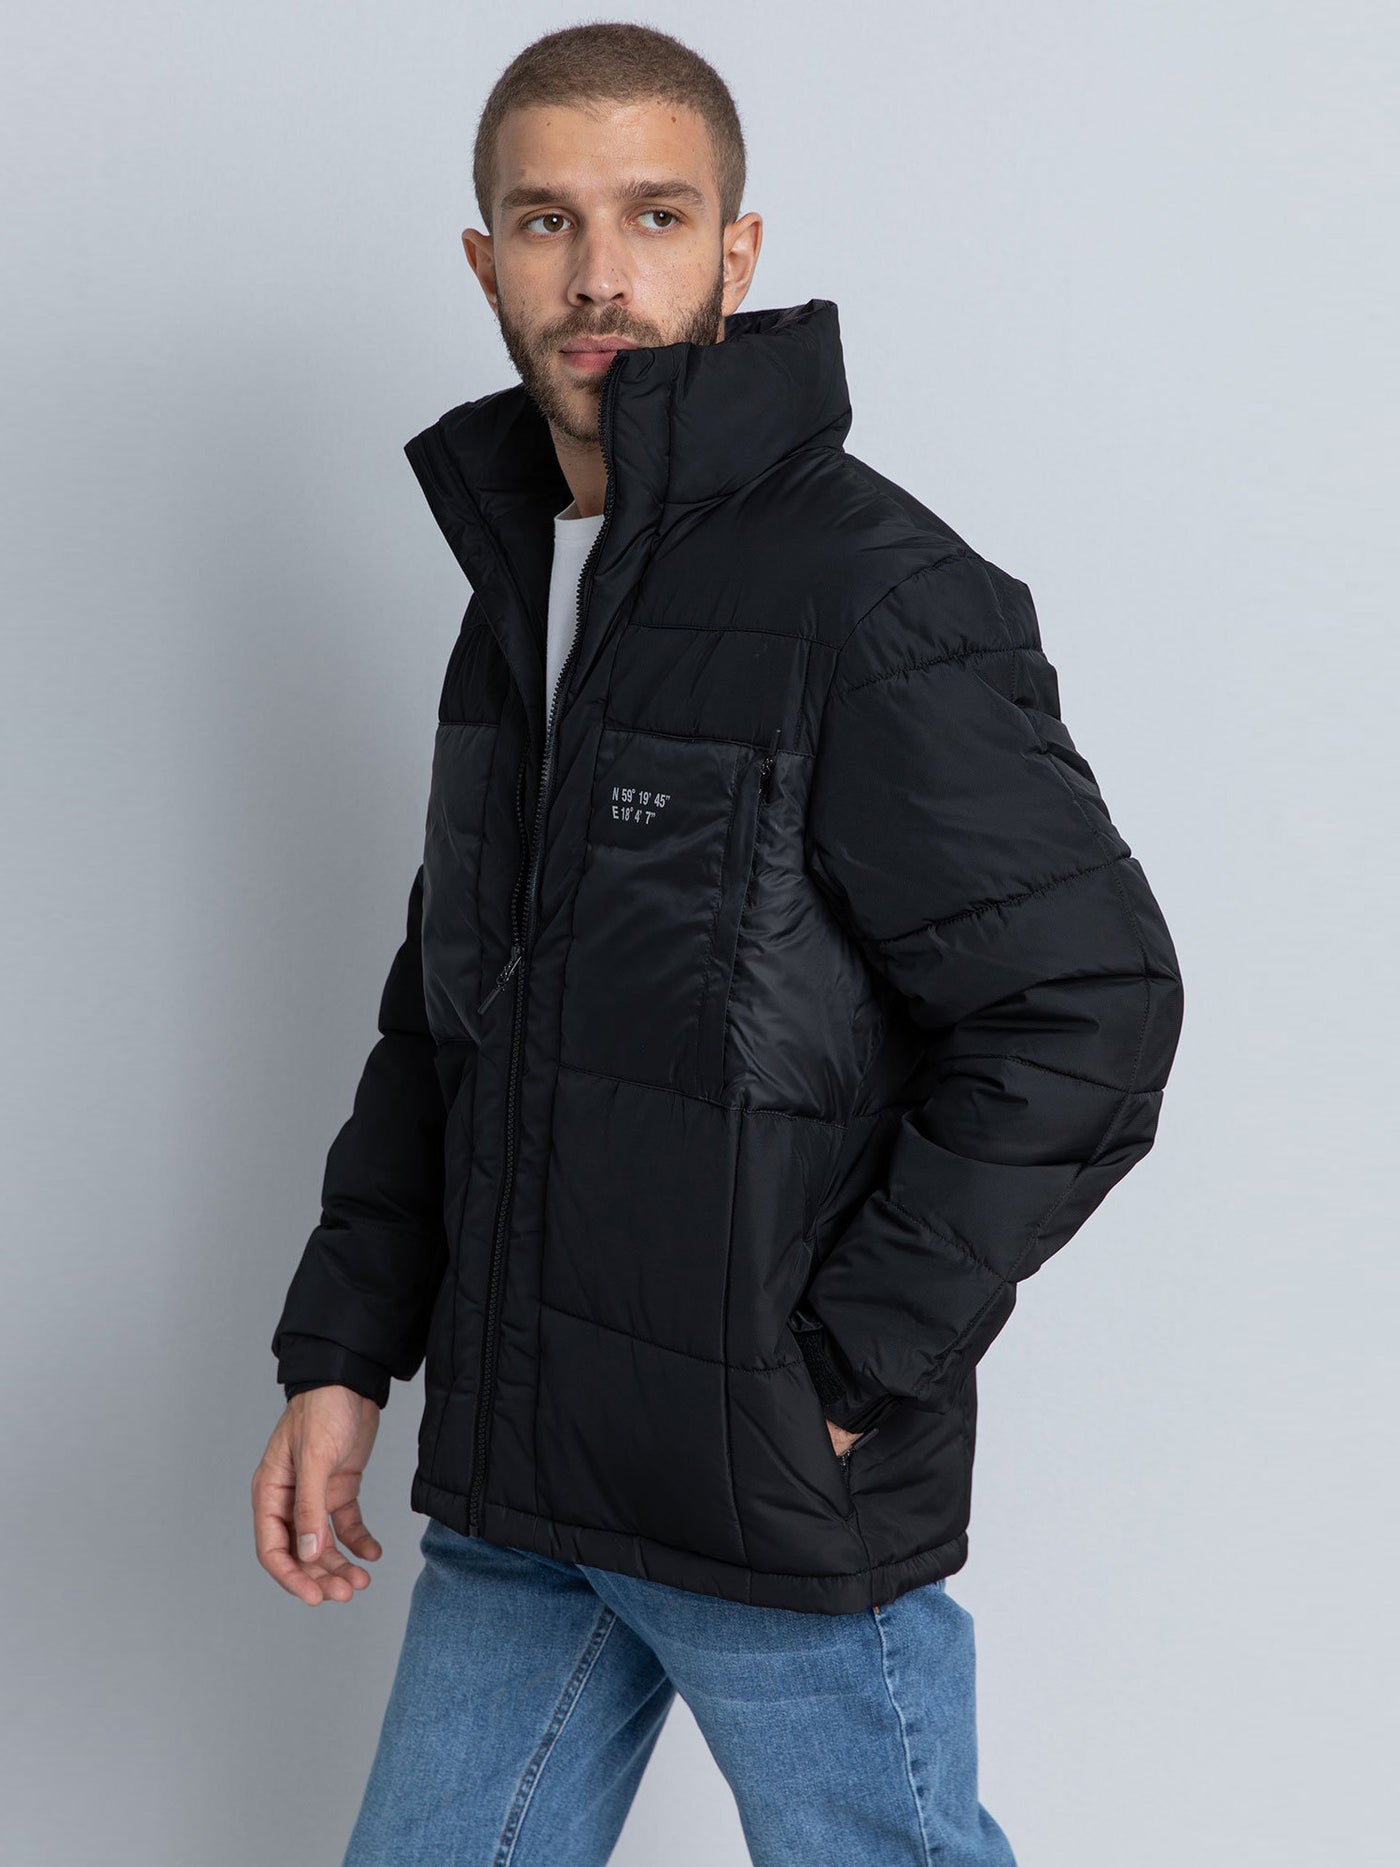 Premoda Mens Jacket Puffer Quilted